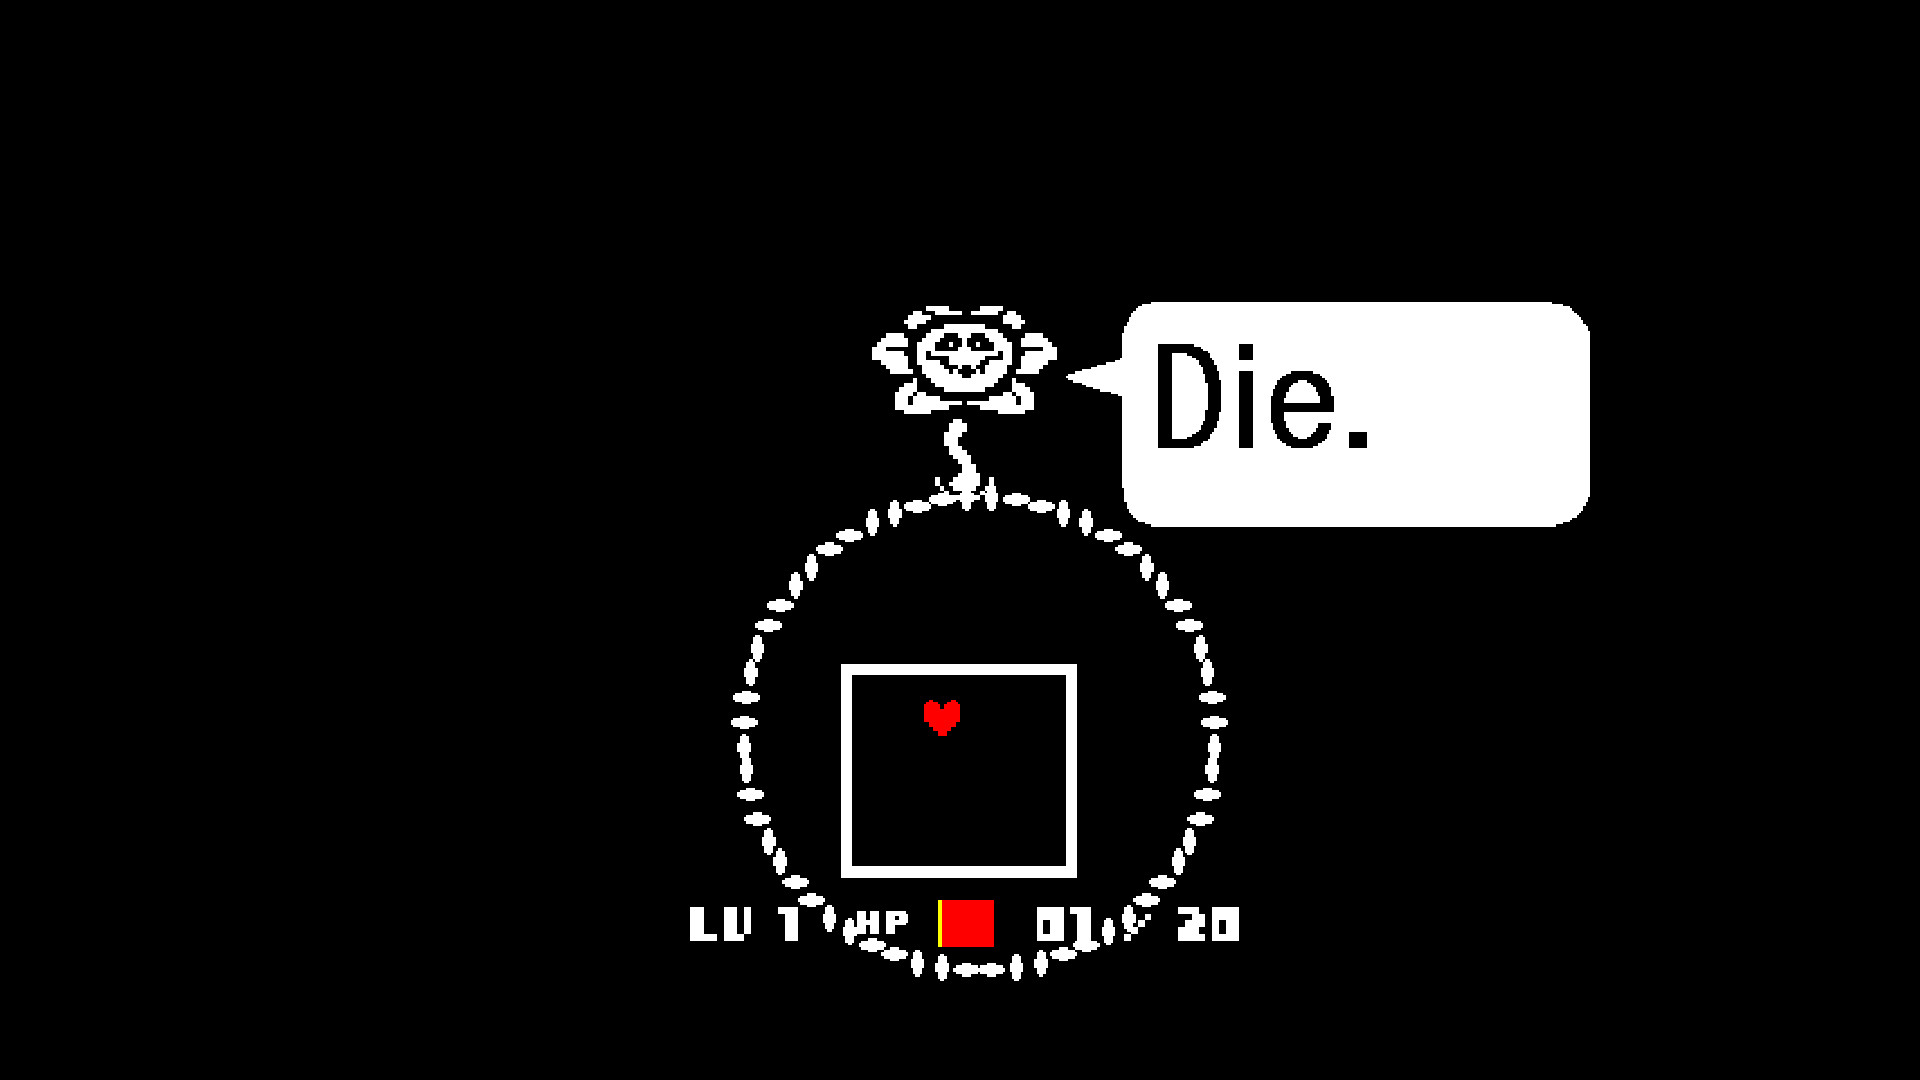 For some reason, Flowey knows how to speak in a different font other than the usual Undertale font